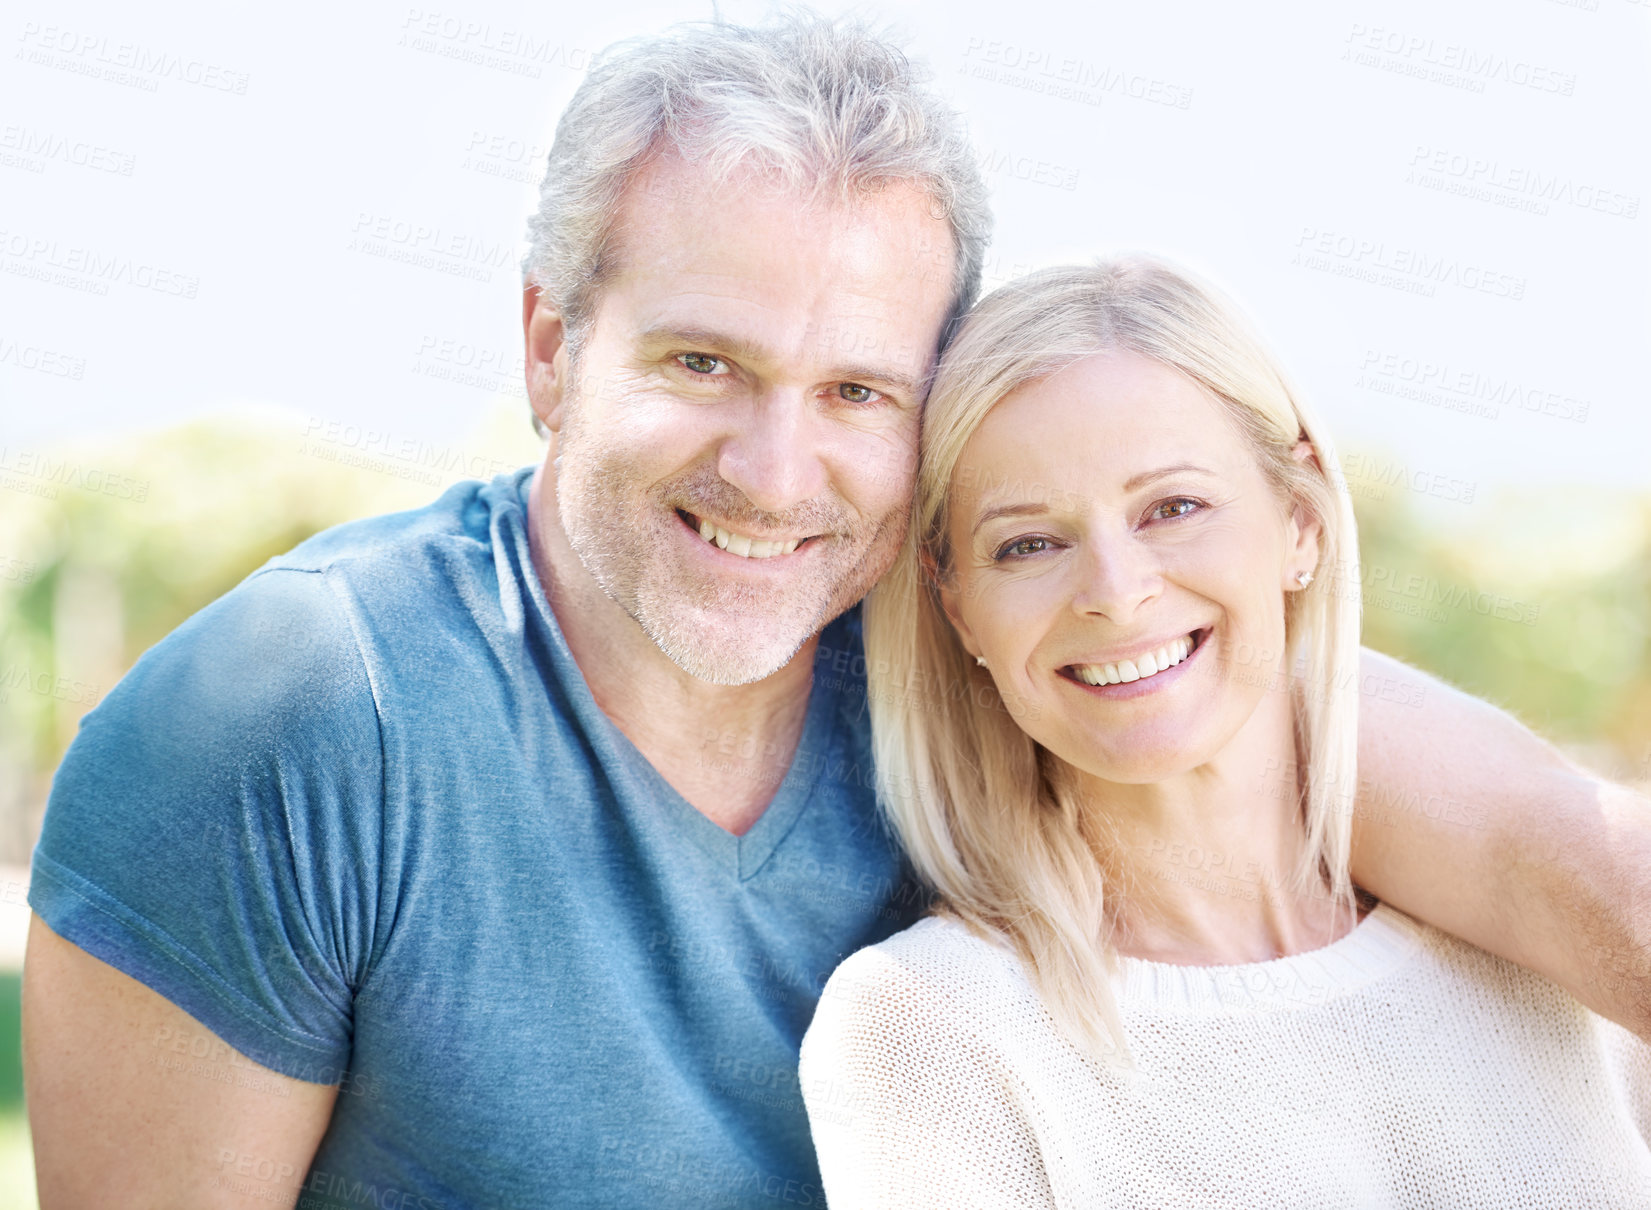 Buy stock photo A happy mature couple smiling at you outdoors